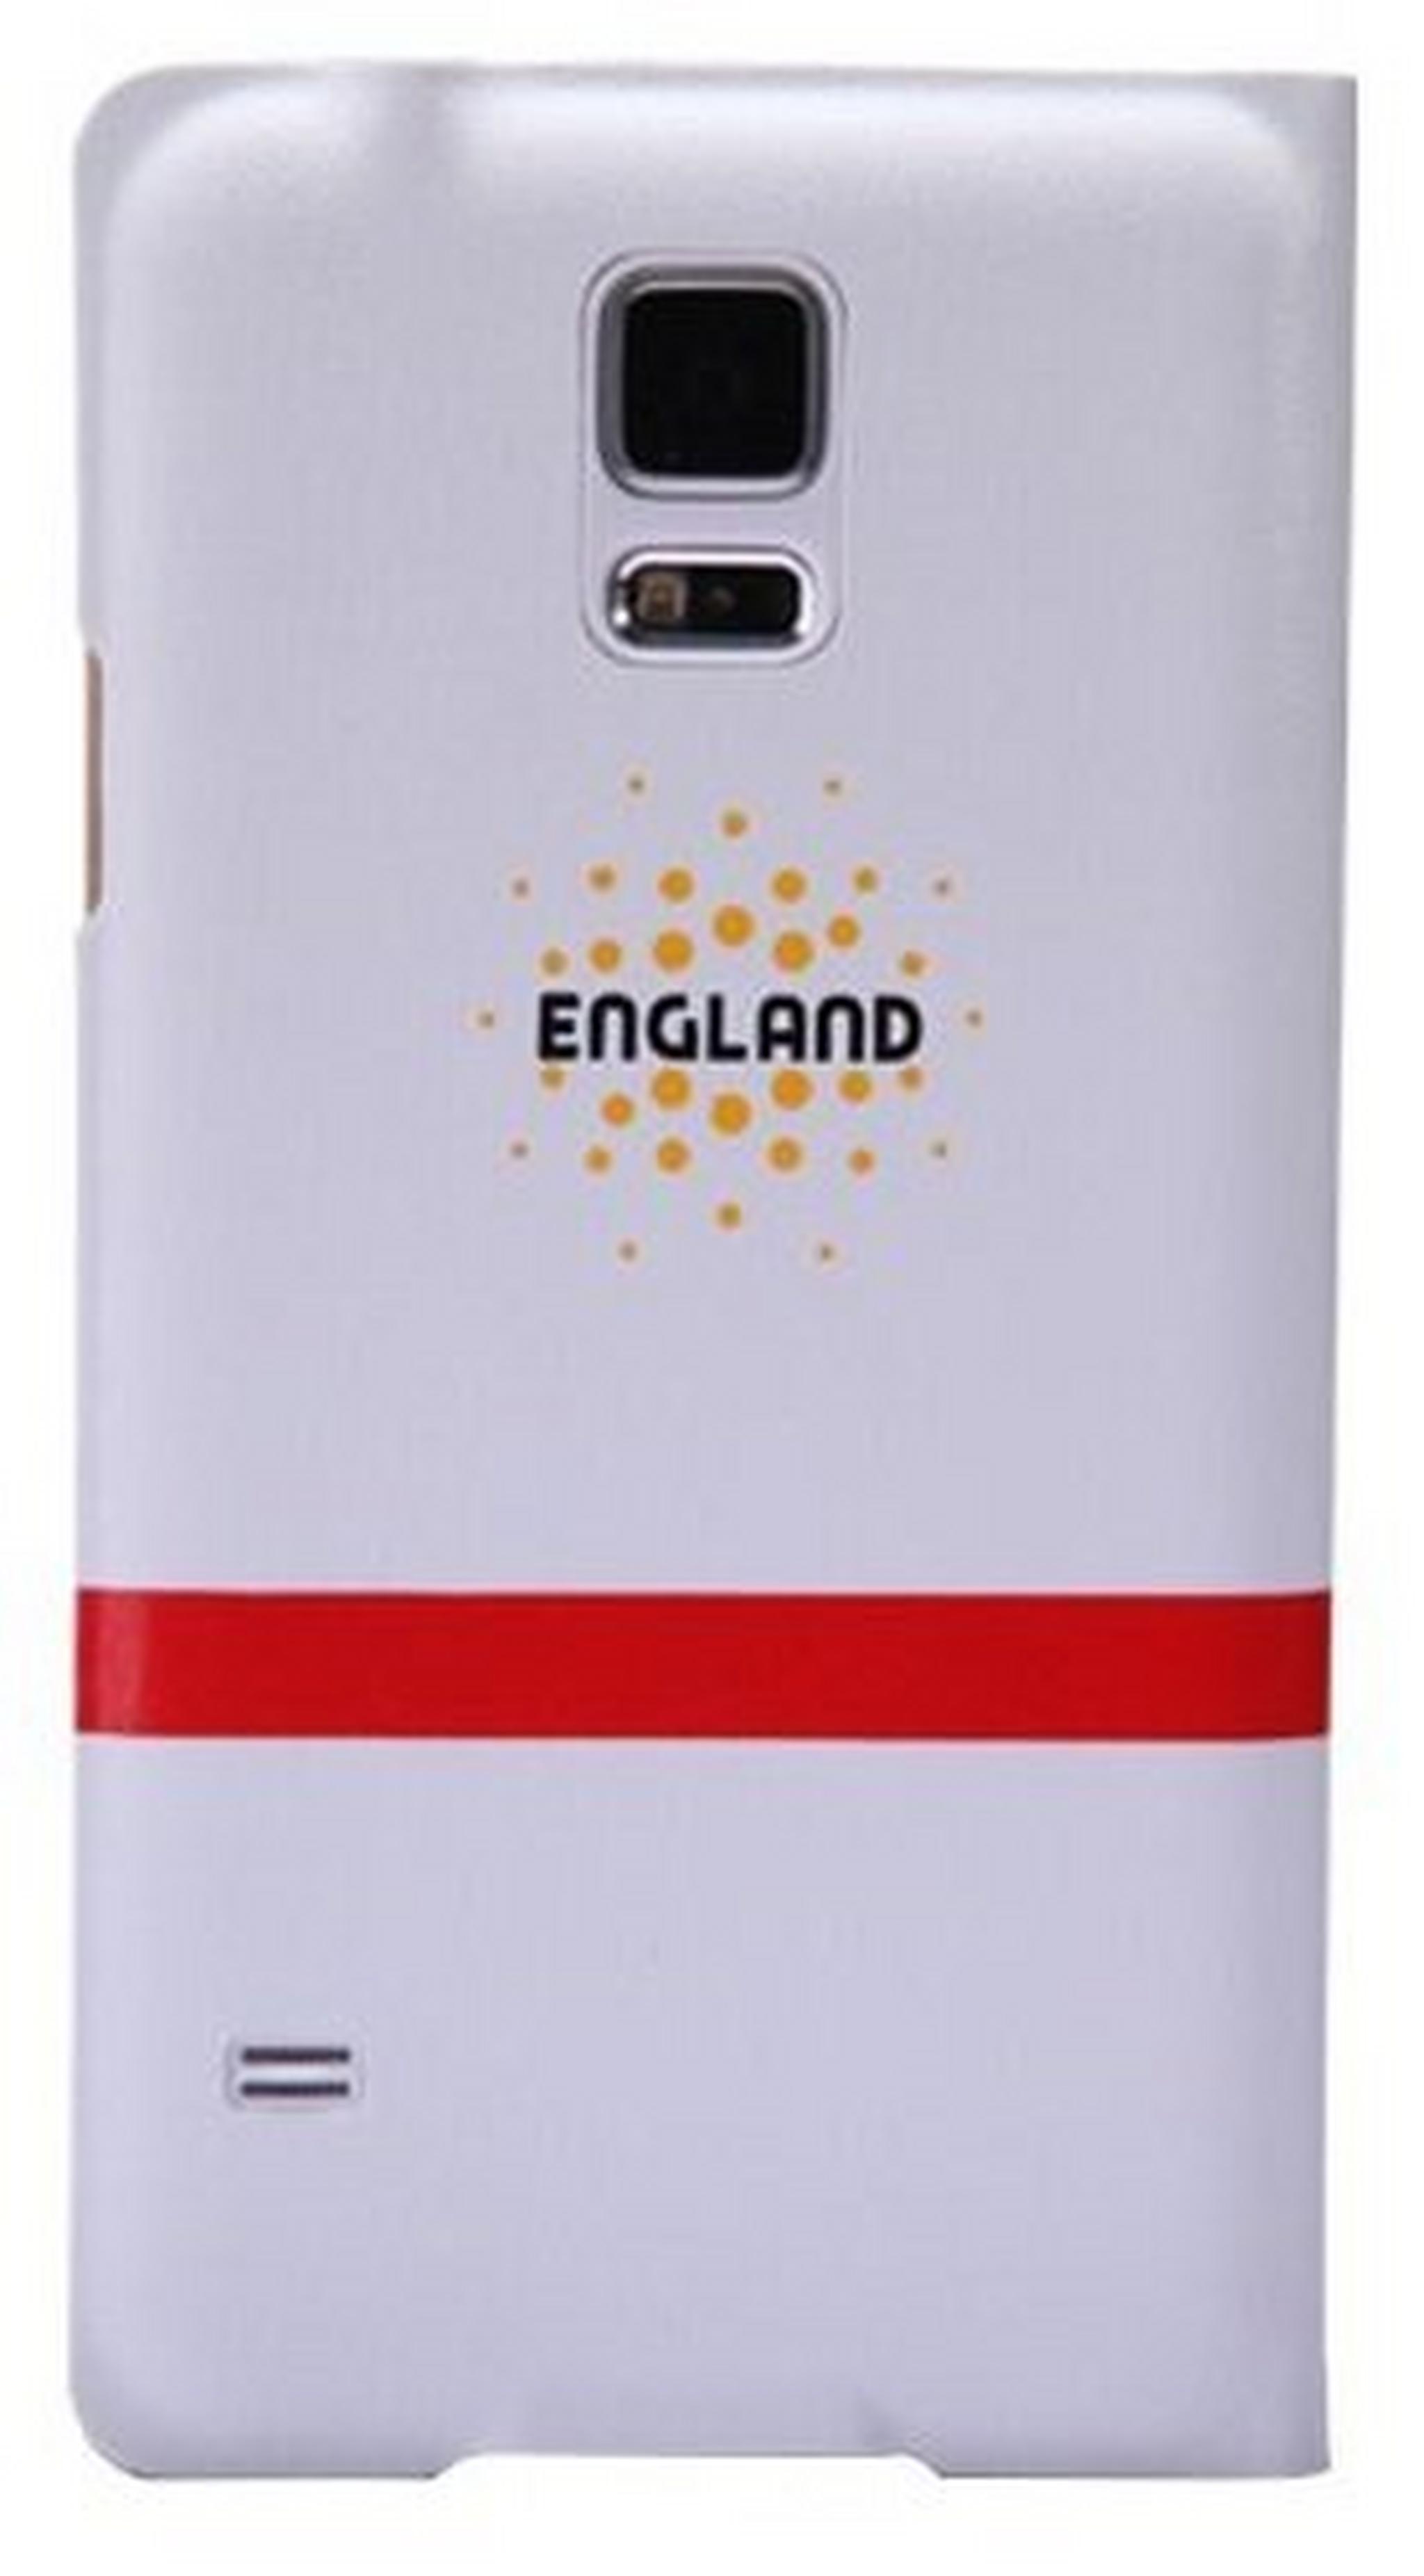 Nillkin World Cup Leather Case for Samsung S5 - England